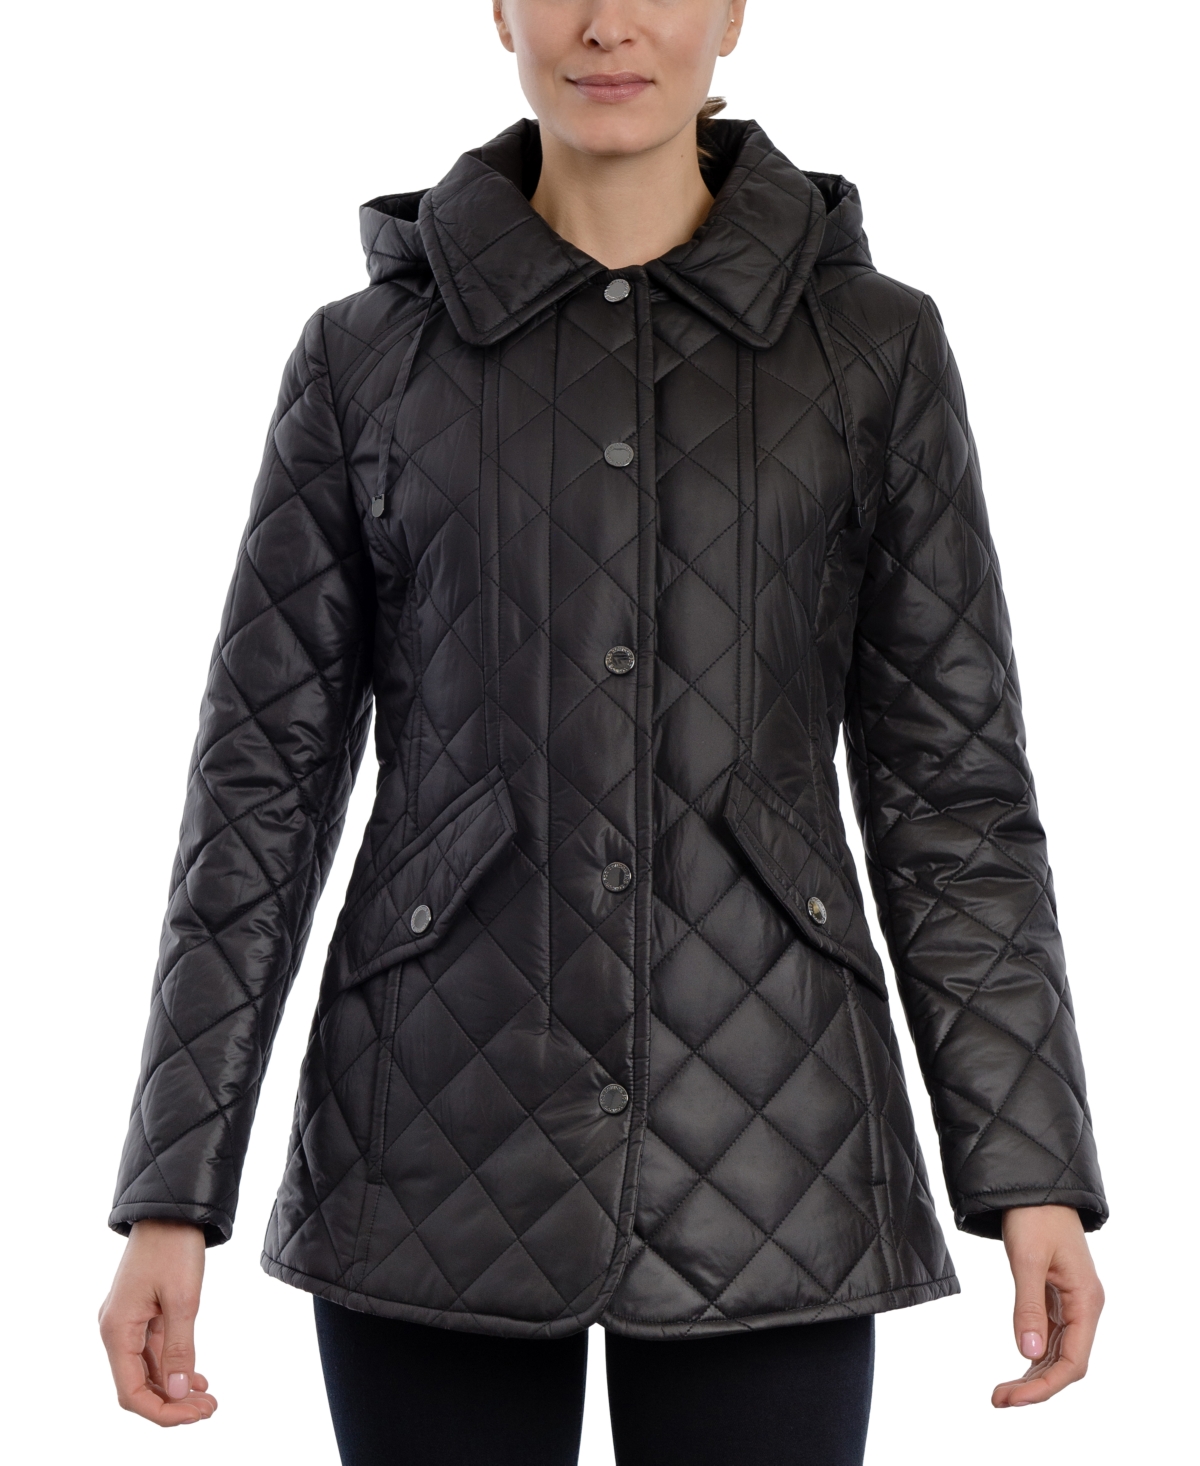 London Fog Women's Hooded Quilted Coat | Smart Closet